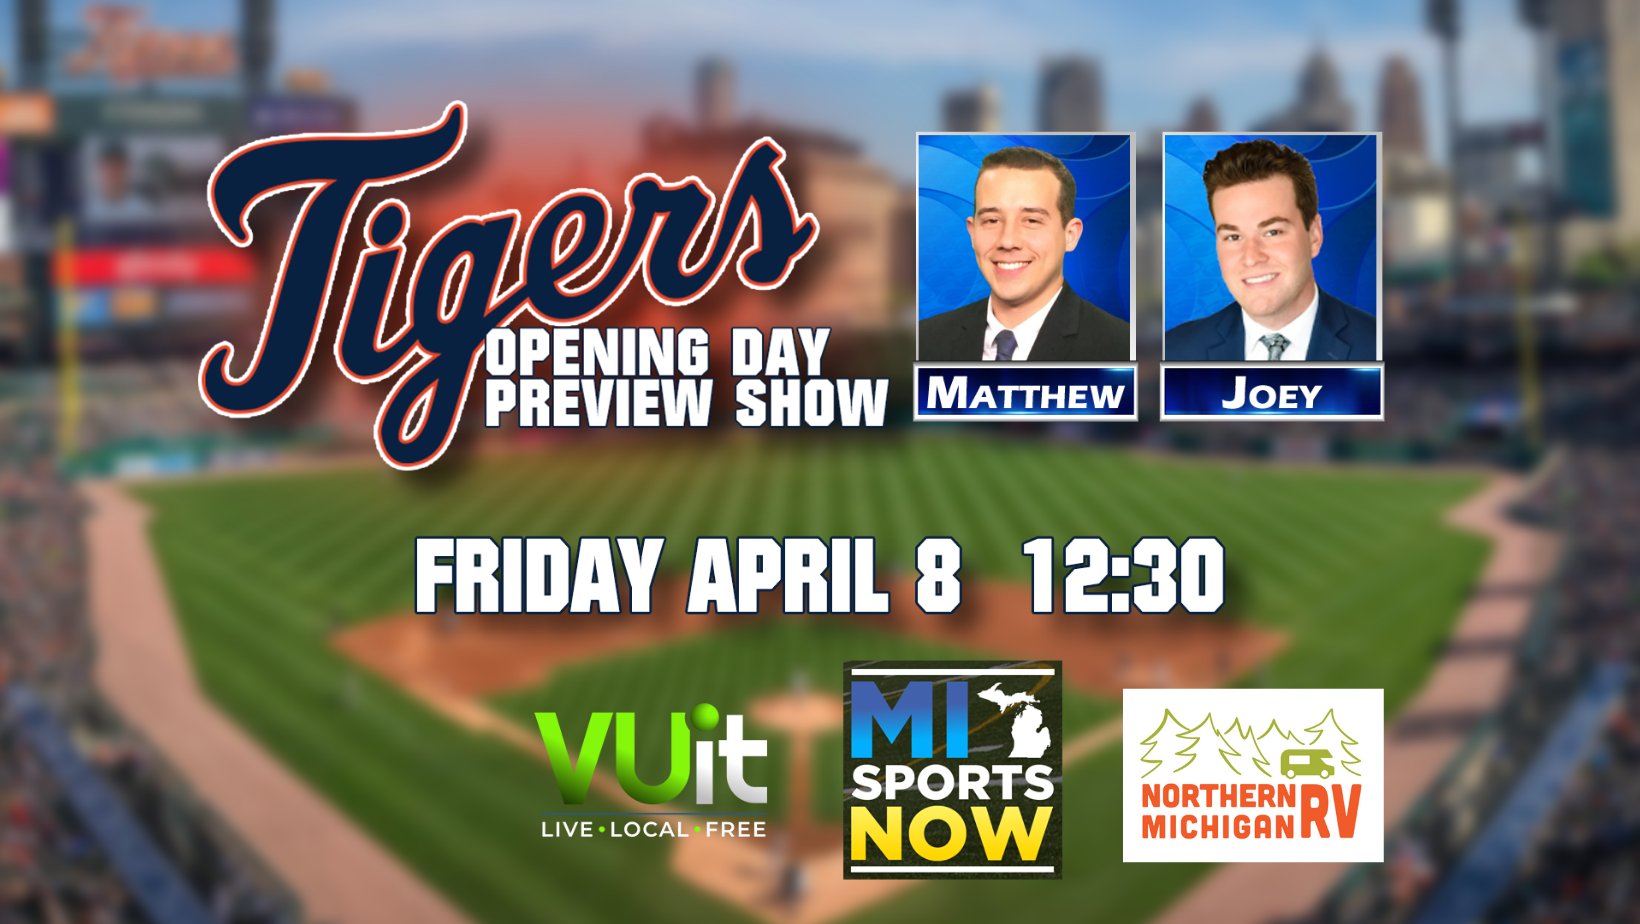 Weather Threat for Detroit Tigers Opening Day - WDET 101.9 FM